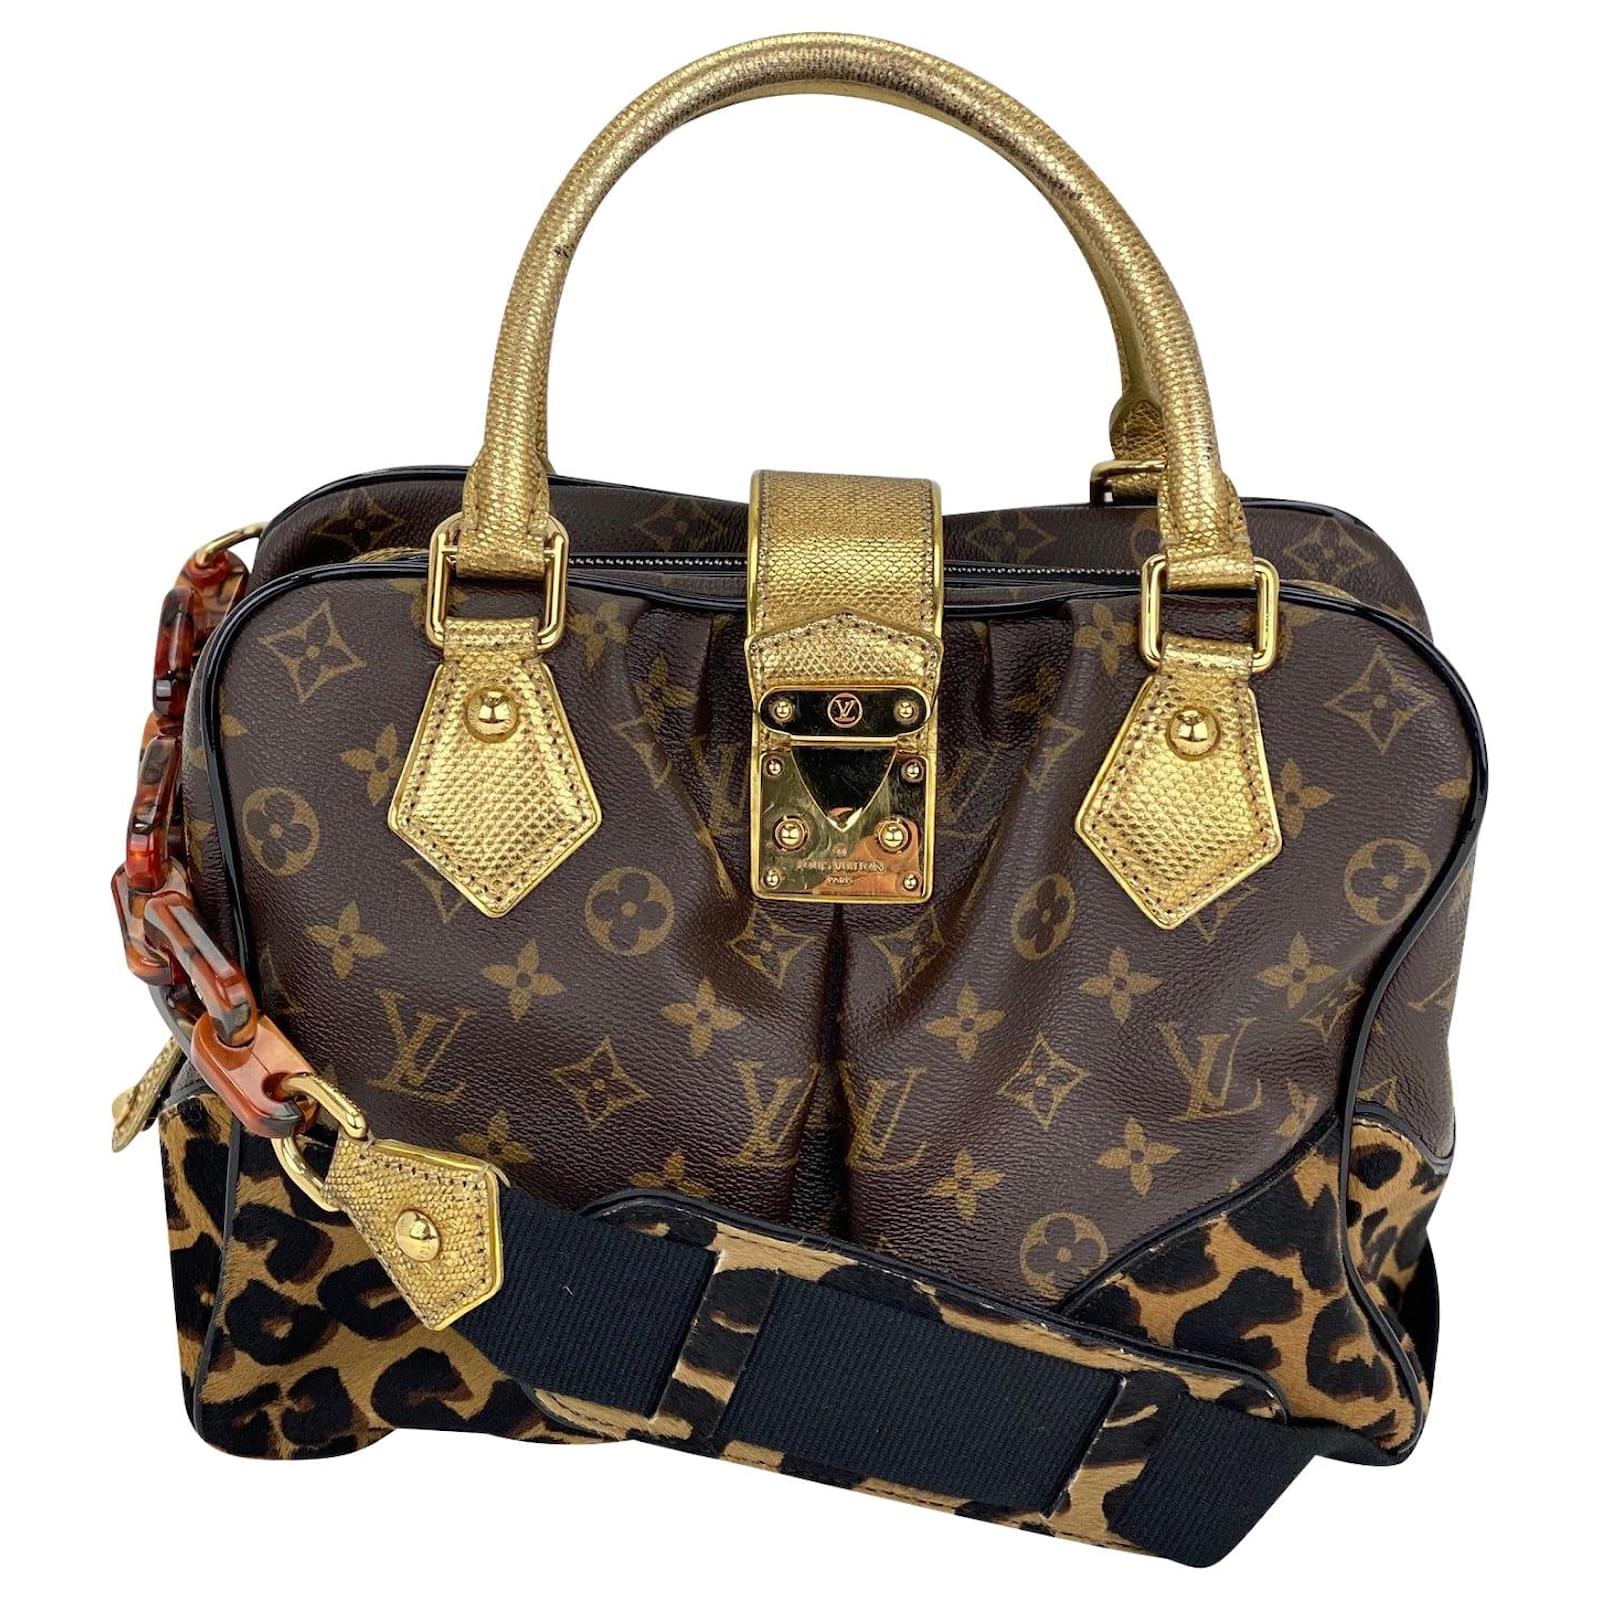 The Best Limited Edition Louis Vuitton Handbags